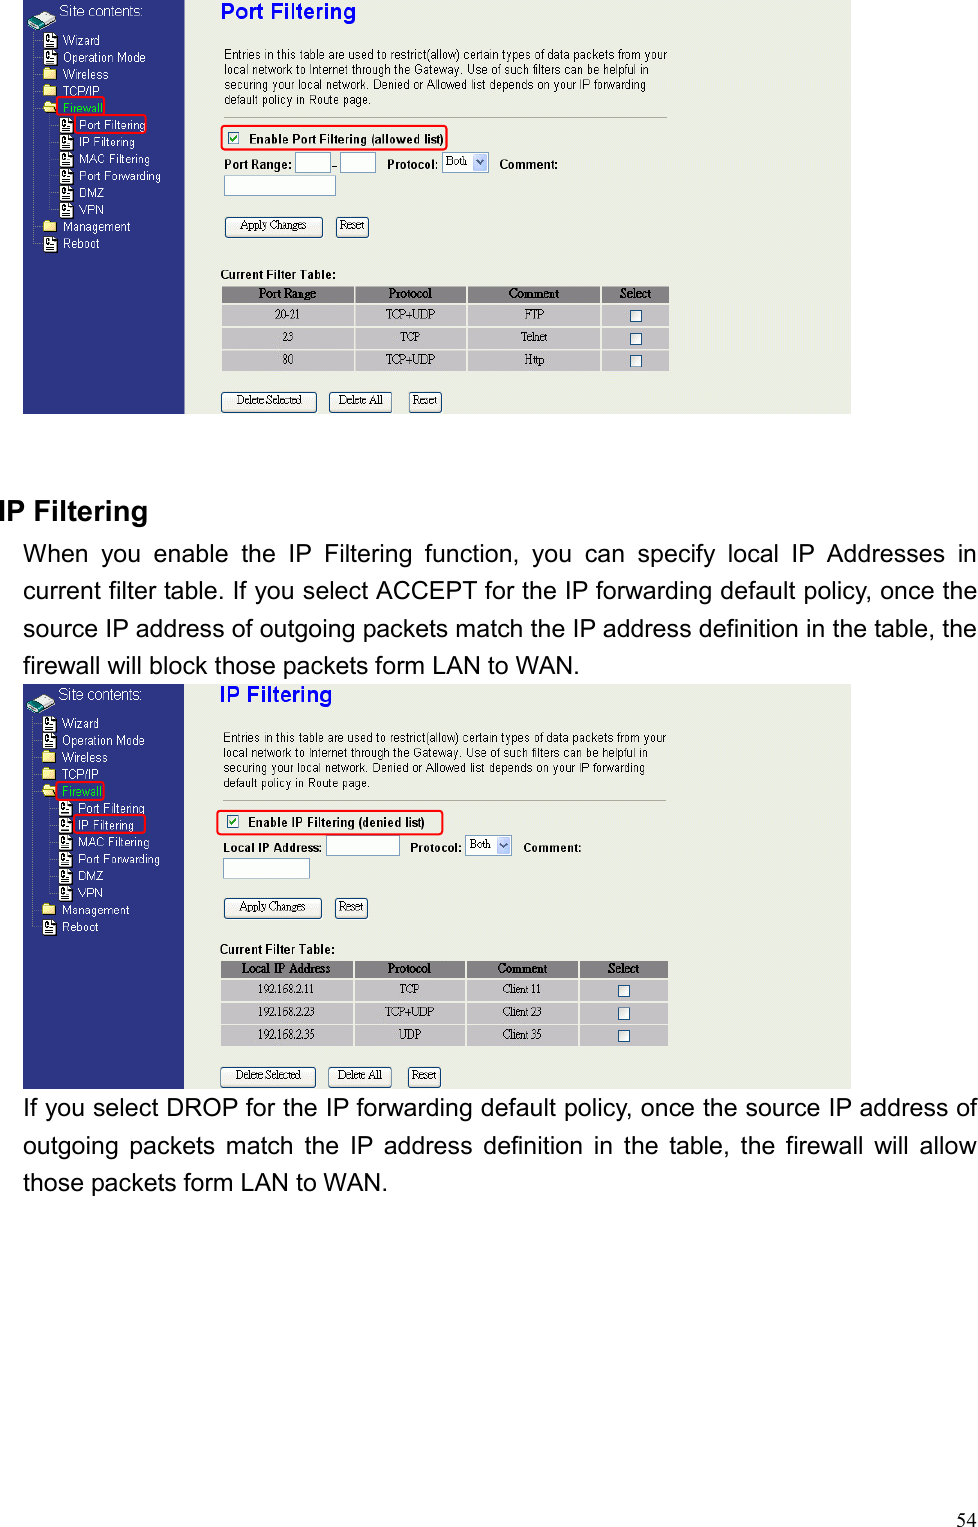  54  IP Filtering When you enable the IP Filtering function, you can specify local IP Addresses in current filter table. If you select ACCEPT for the IP forwarding default policy, once the source IP address of outgoing packets match the IP address definition in the table, the firewall will block those packets form LAN to WAN.  If you select DROP for the IP forwarding default policy, once the source IP address of outgoing packets match the IP address definition in the table, the firewall will allow those packets form LAN to WAN. 